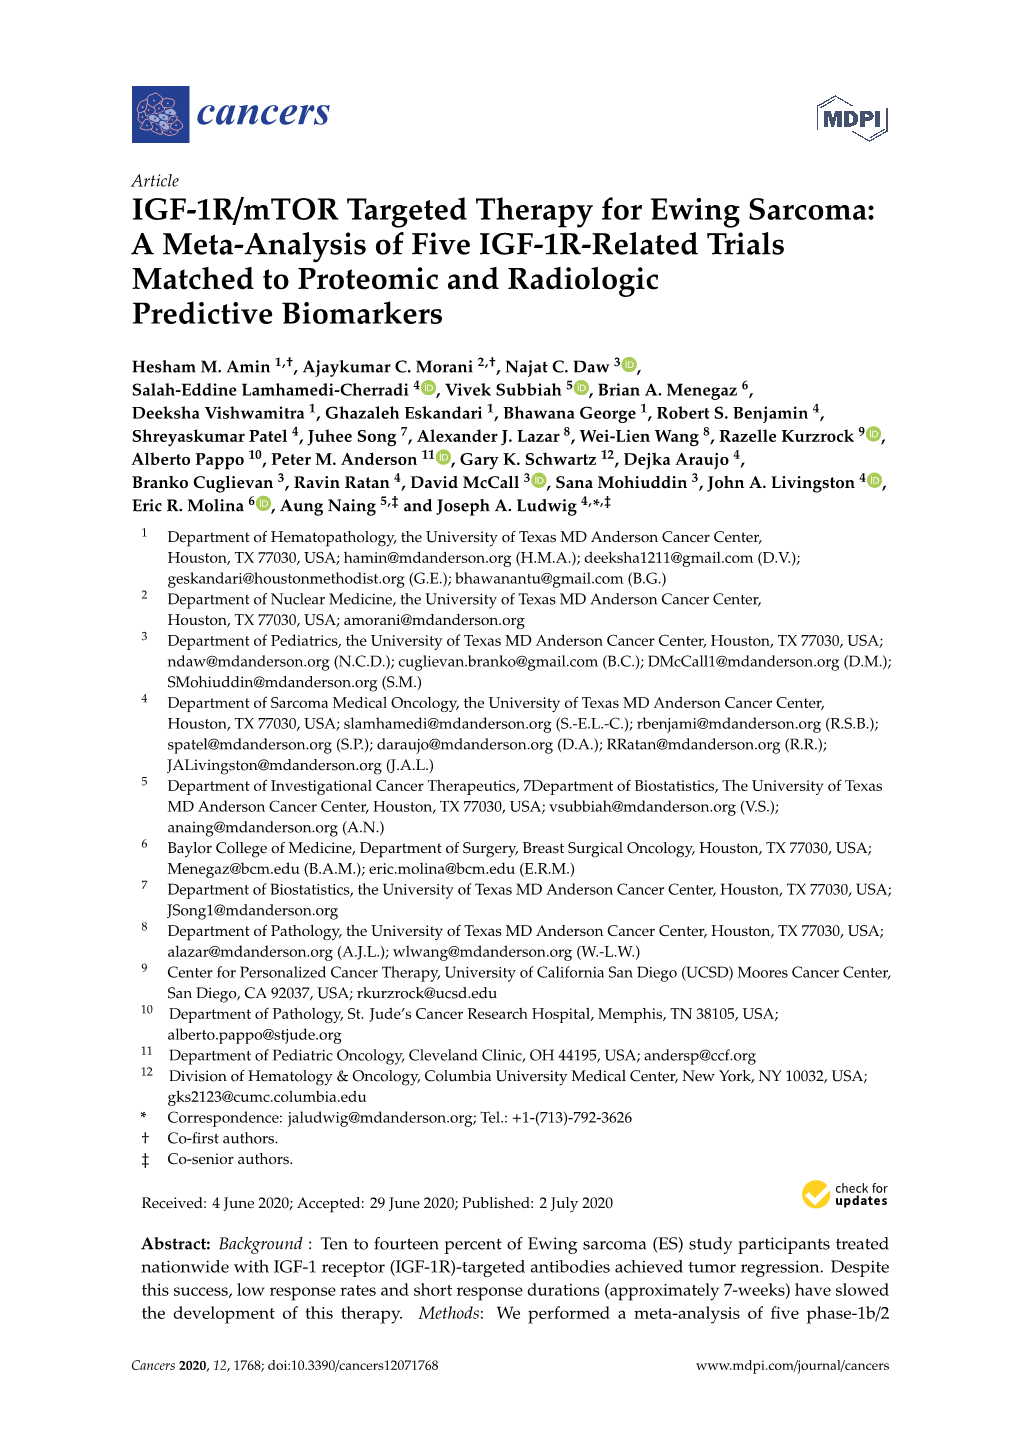 IGF-1R/Mtor Targeted Therapy for Ewing Sarcoma: a Meta-Analysis of Five IGF-1R-Related Trials Matched to Proteomic and Radiologic Predictive Biomarkers